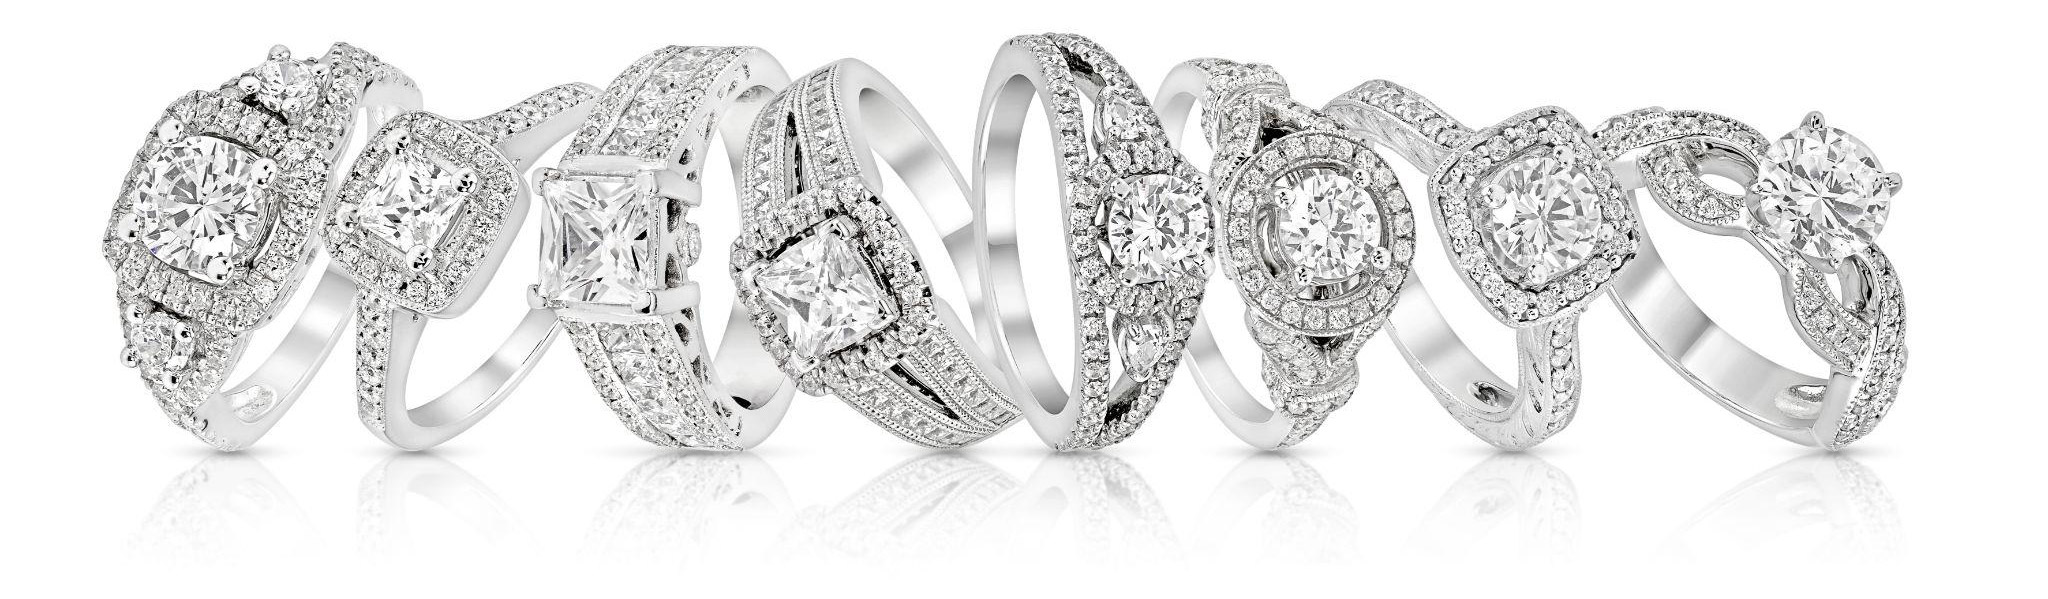 Princess Cut Engagement Rings | Wedding Proposal Bands In SG